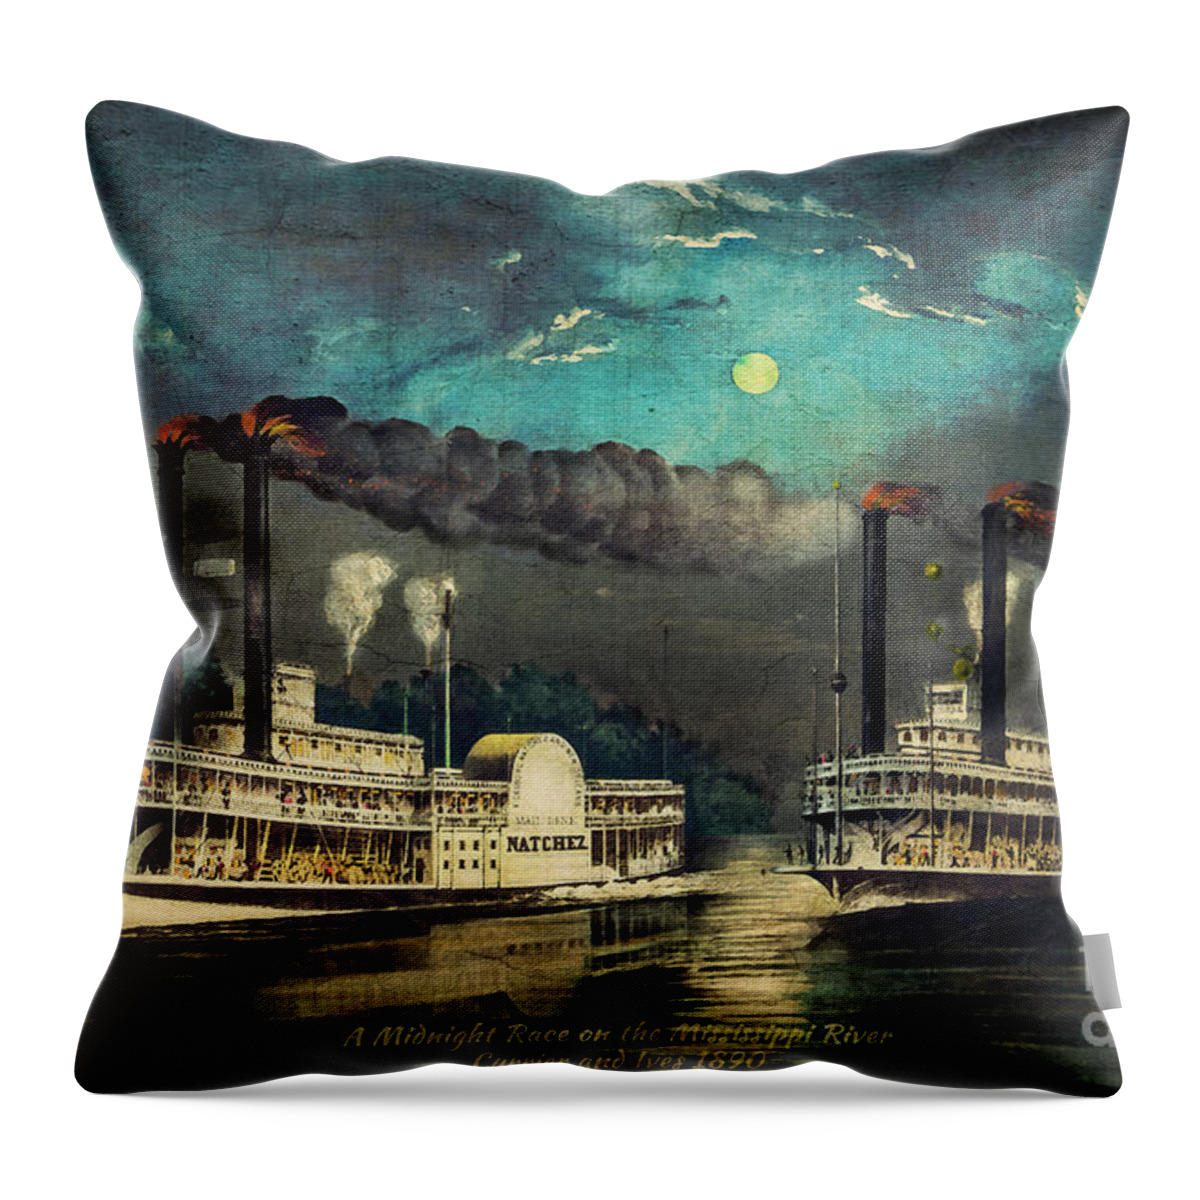 Steamboats Throw Pillow featuring the digital art Steamboat Racing on the Mississippi by Lianne Schneider